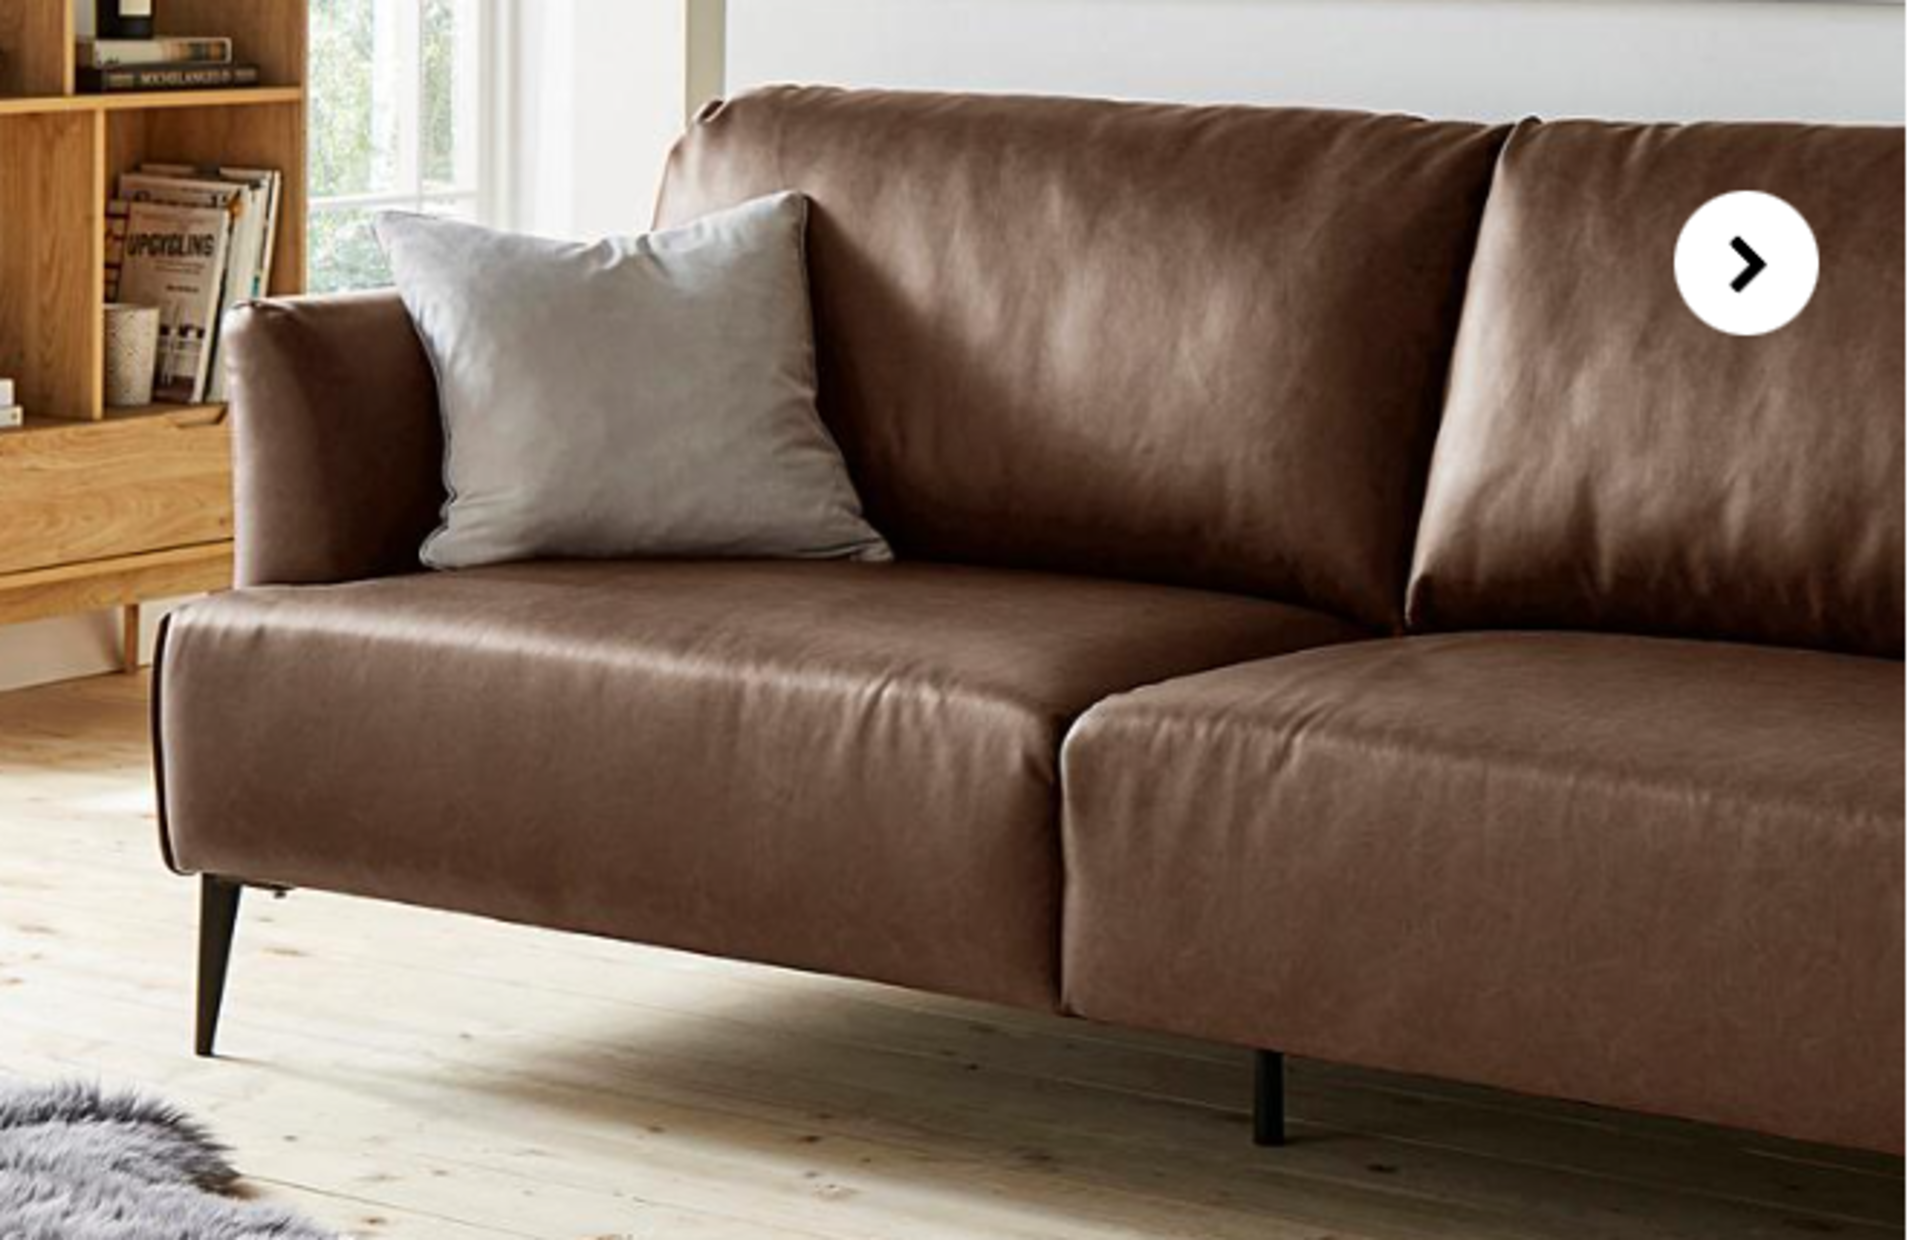 Gray & Osbourn No.131 Faux Leather 3 Seater Sofa. - RRP £899.00. SR5. Part of the Gray & Osbourn